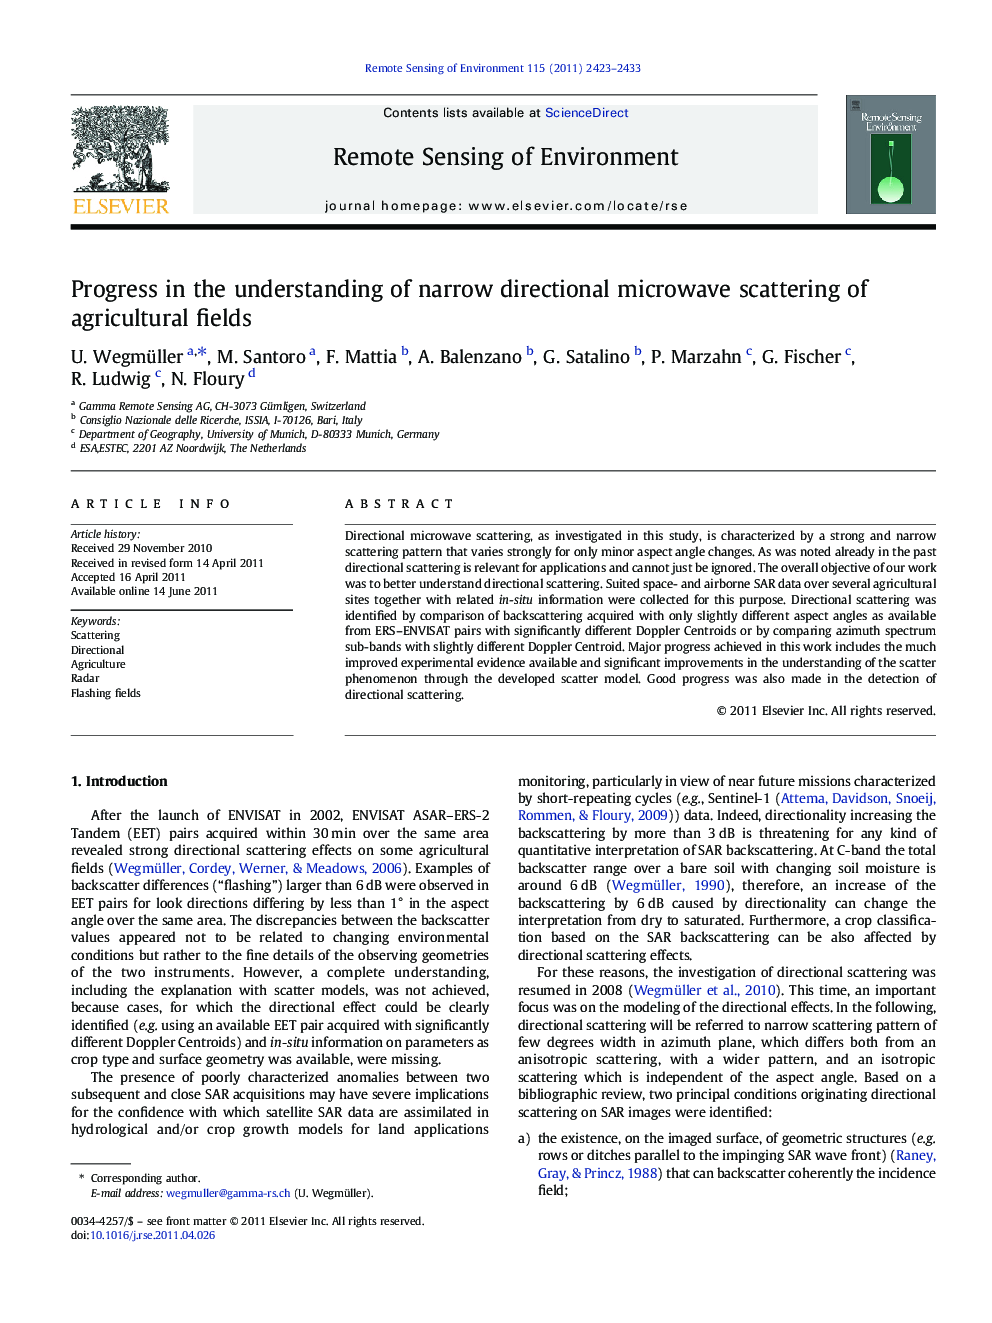 Progress in the understanding of narrow directional microwave scattering of agricultural fields